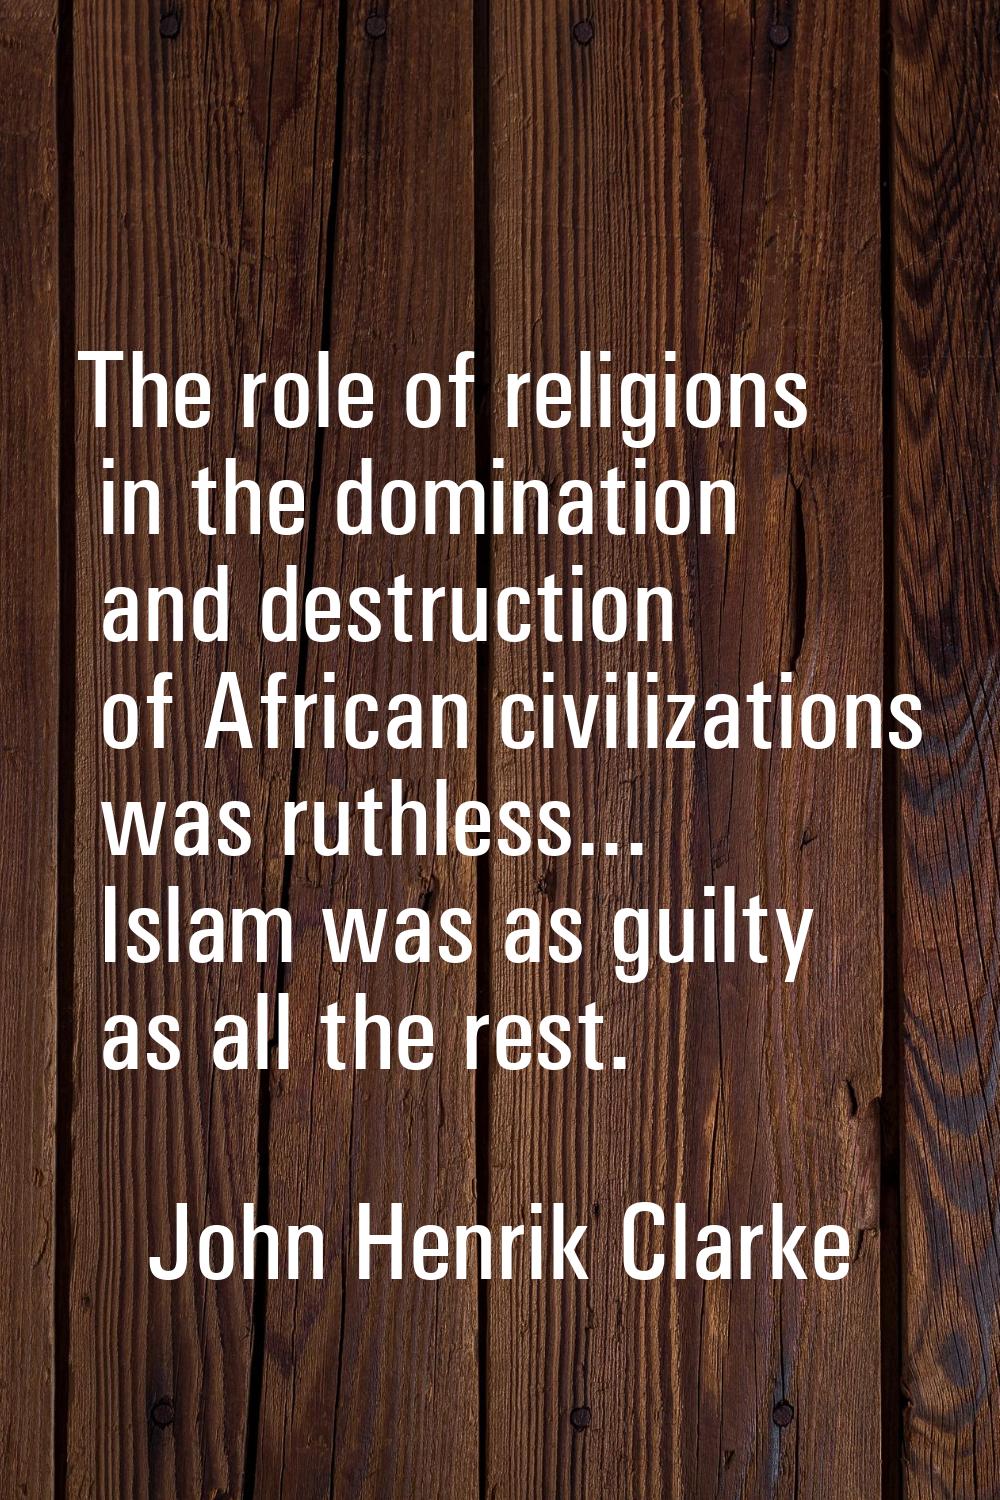 The role of religions in the domination and destruction of African civilizations was ruthless... Is